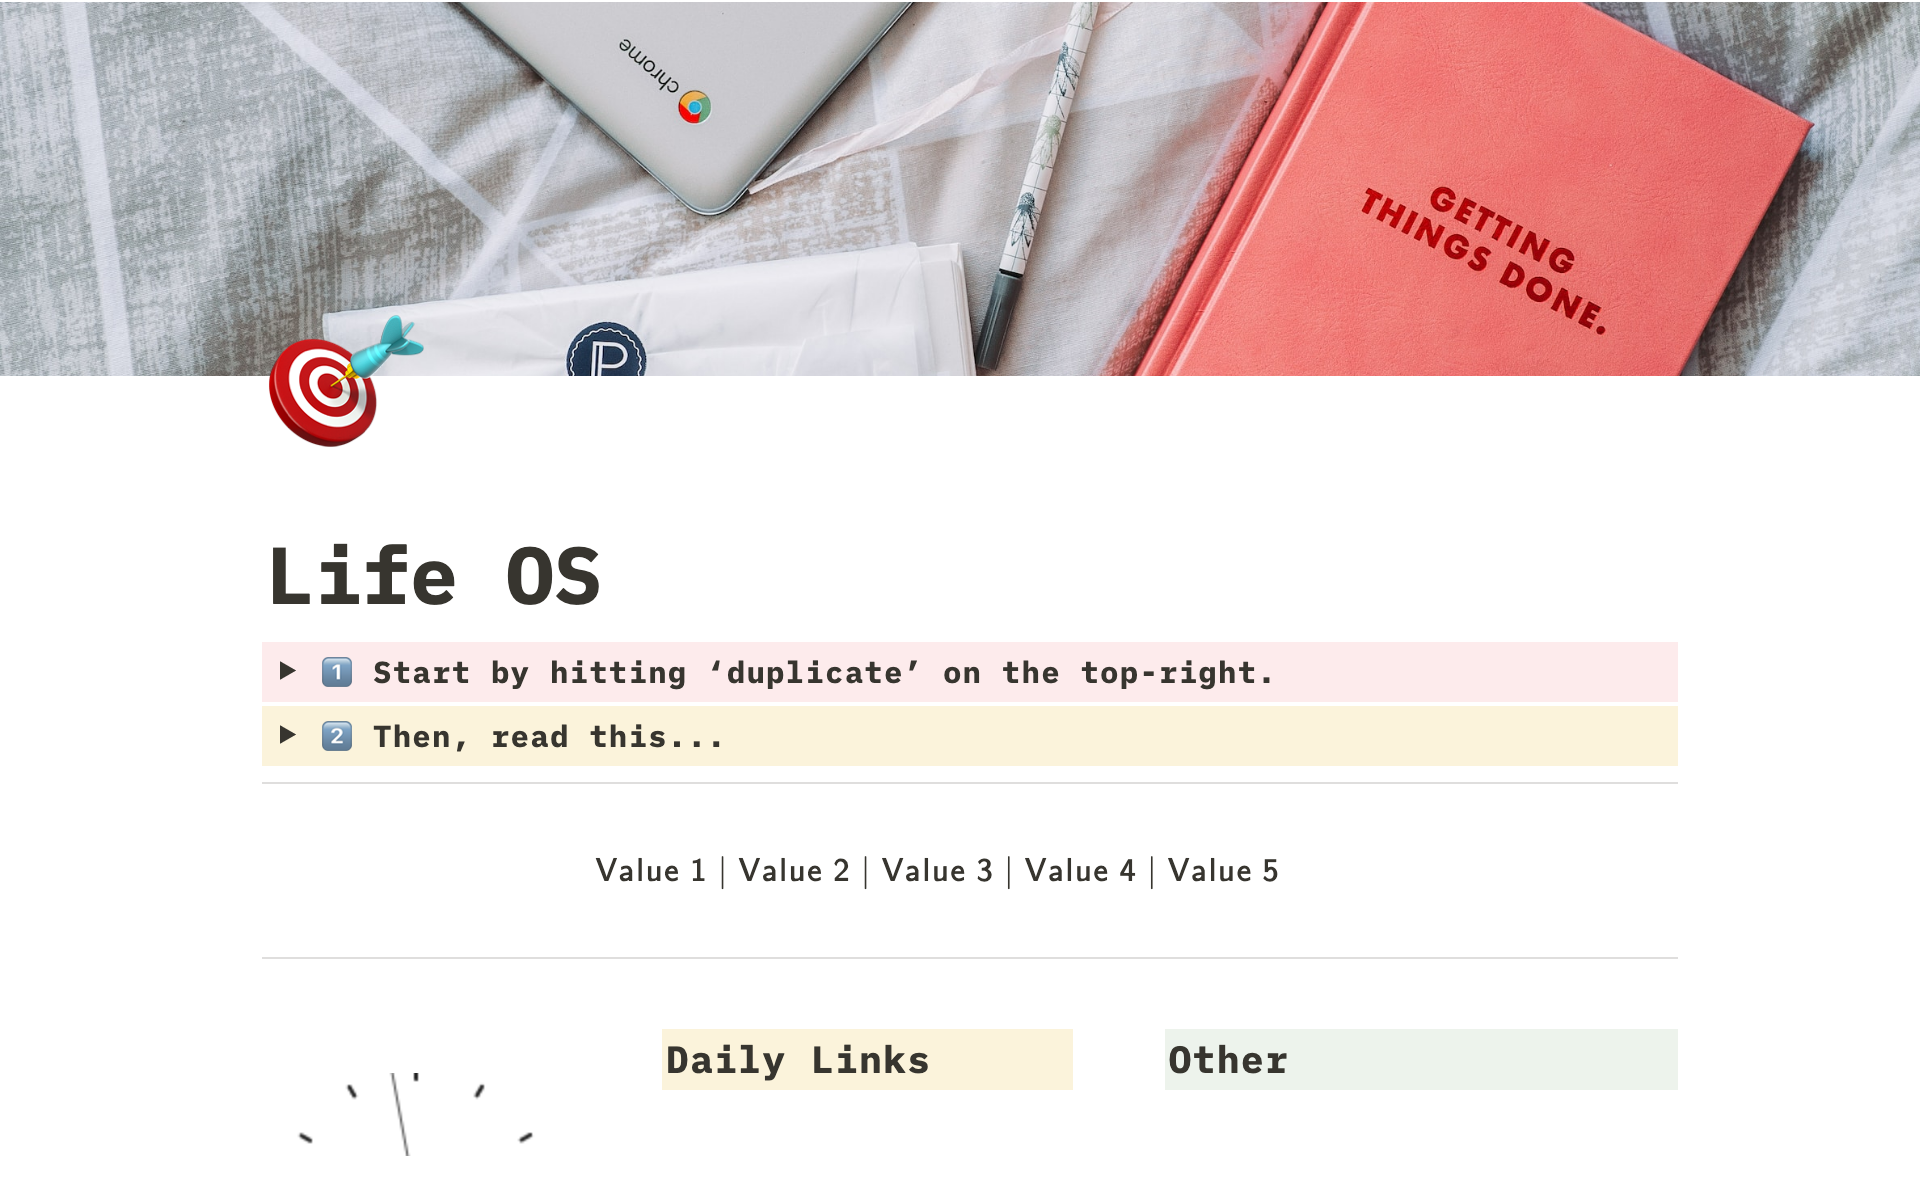 A super-efficient way to organize your daily life using Notion.